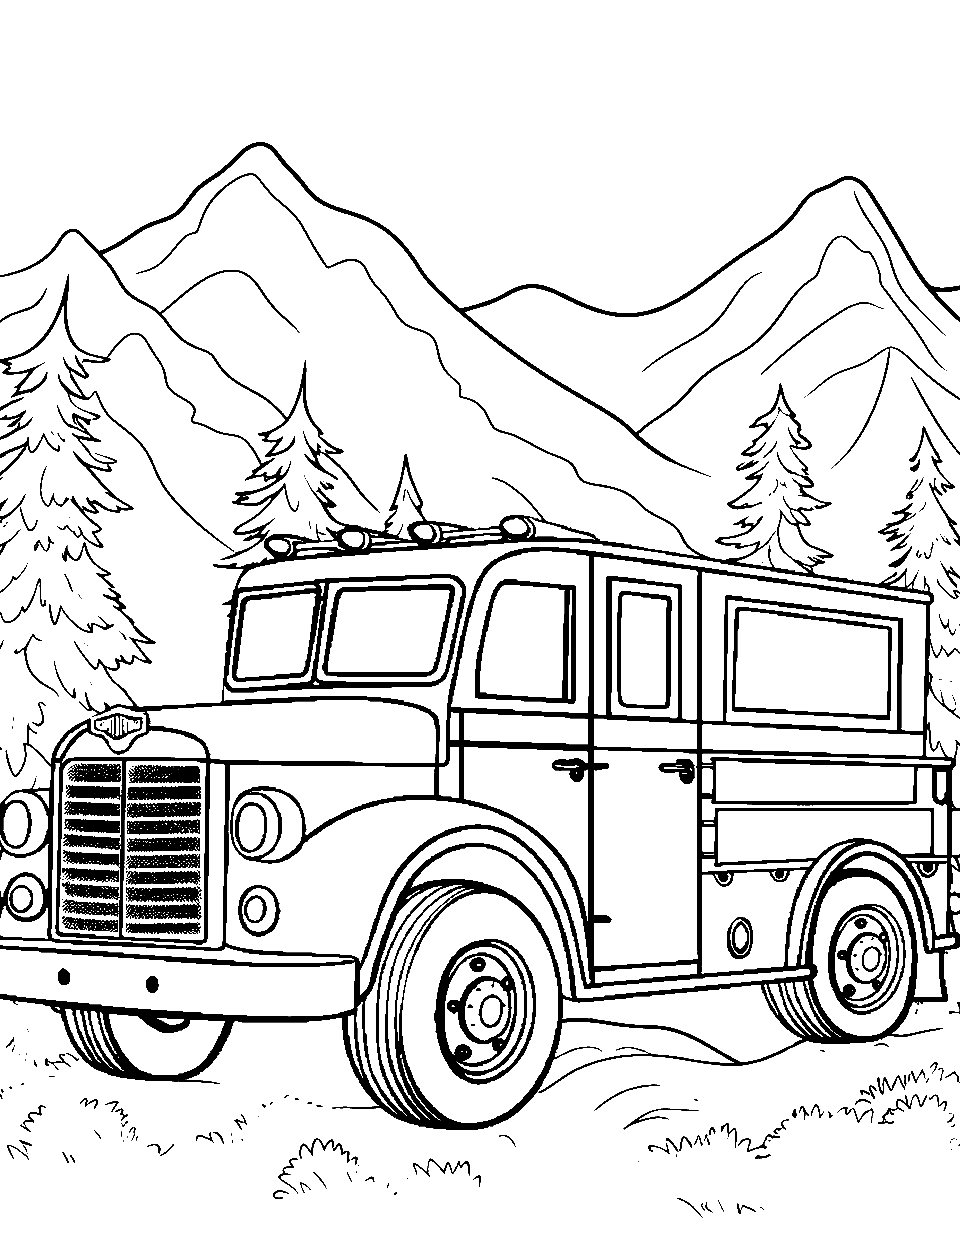 Mountain Rescue Mission Fire Truck Coloring Page - A fire truck on a mountain road, with forests around.